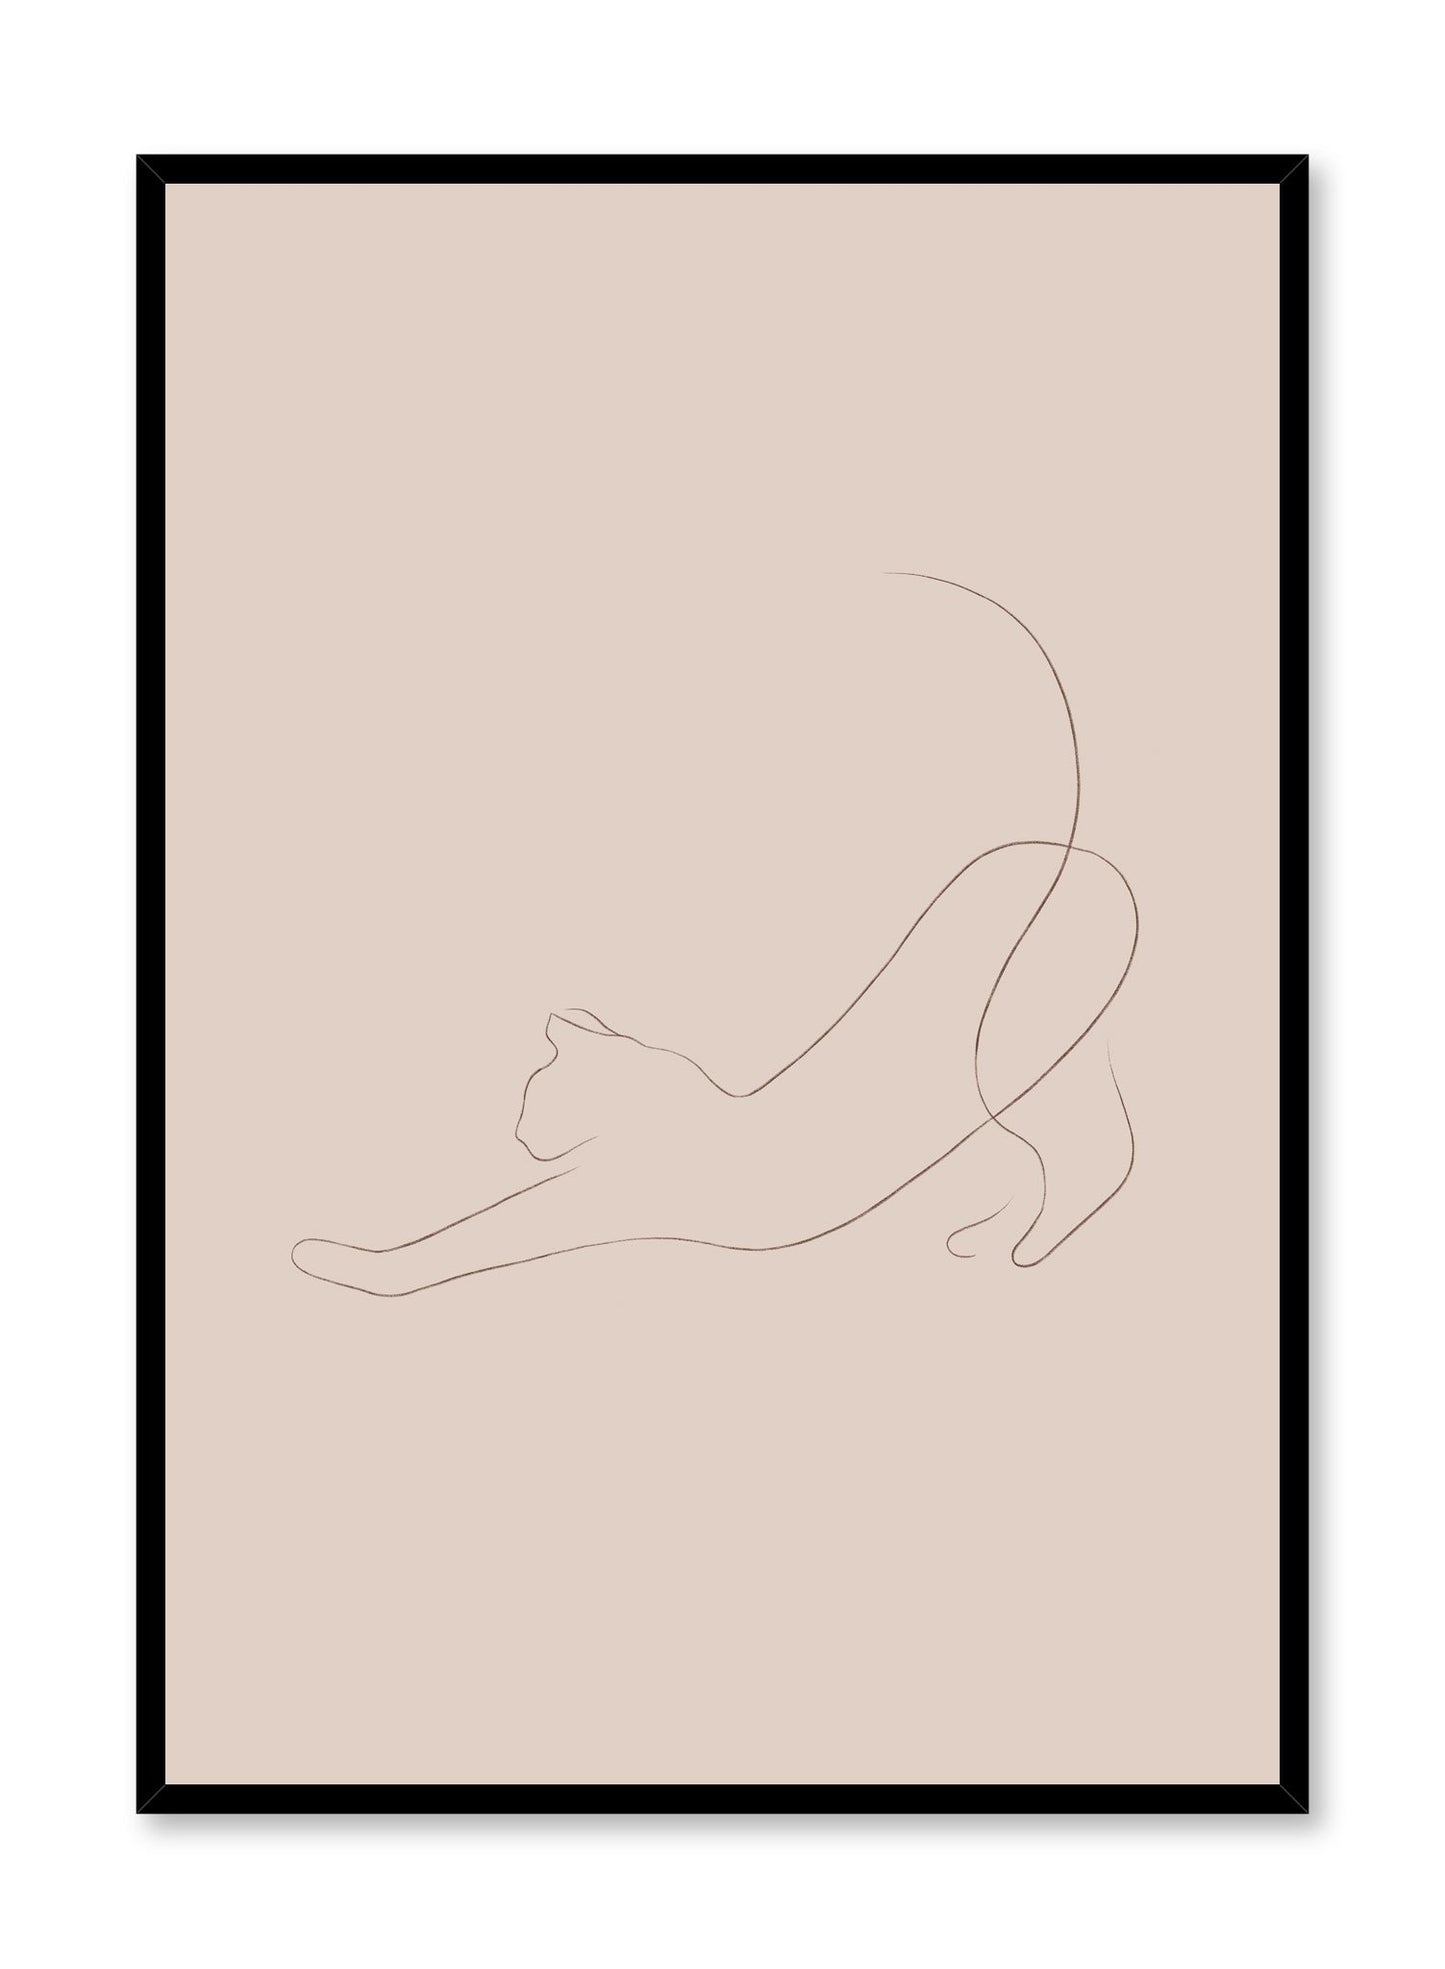 Modern minimalist poster by Opposite Wall with abstract illustration of stretching cat line art with beige background